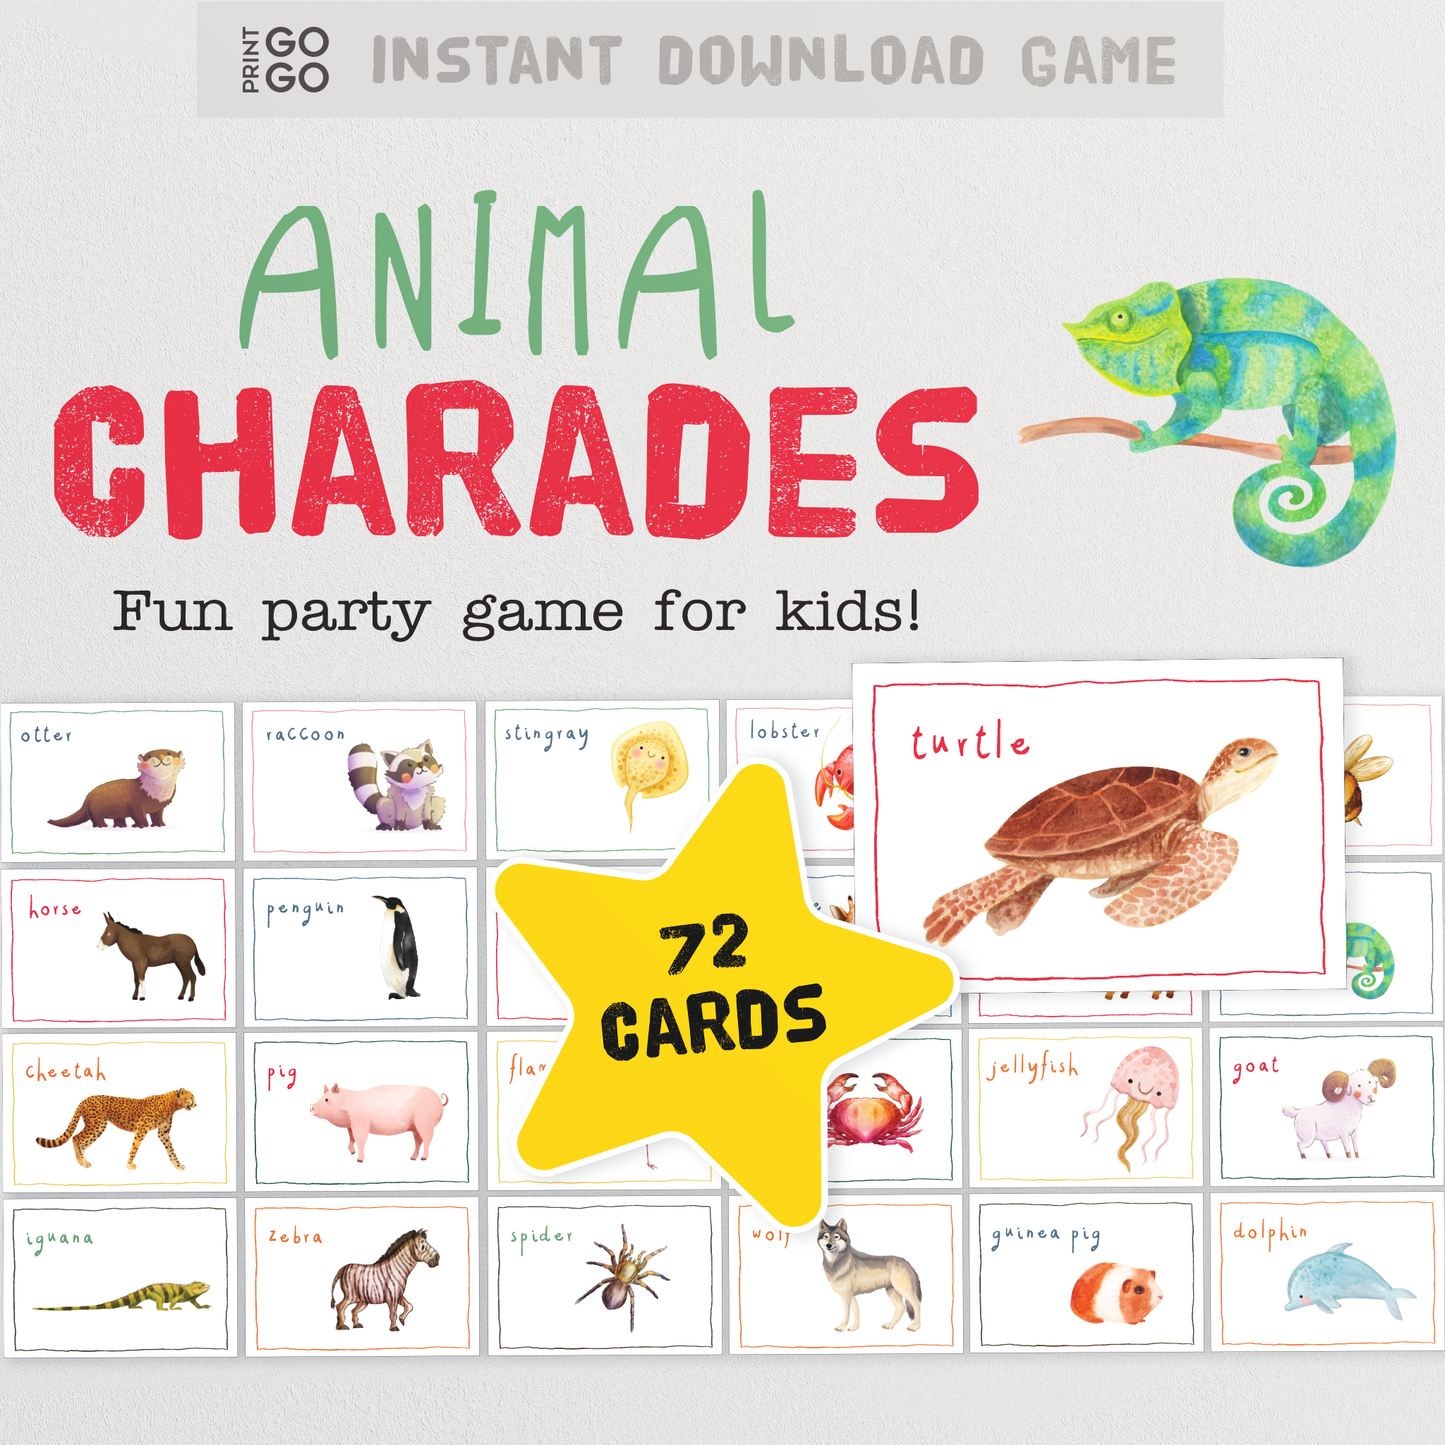 Animal Charades - The Hilarious Family Party Game of Acting Out and Guessing Creatures